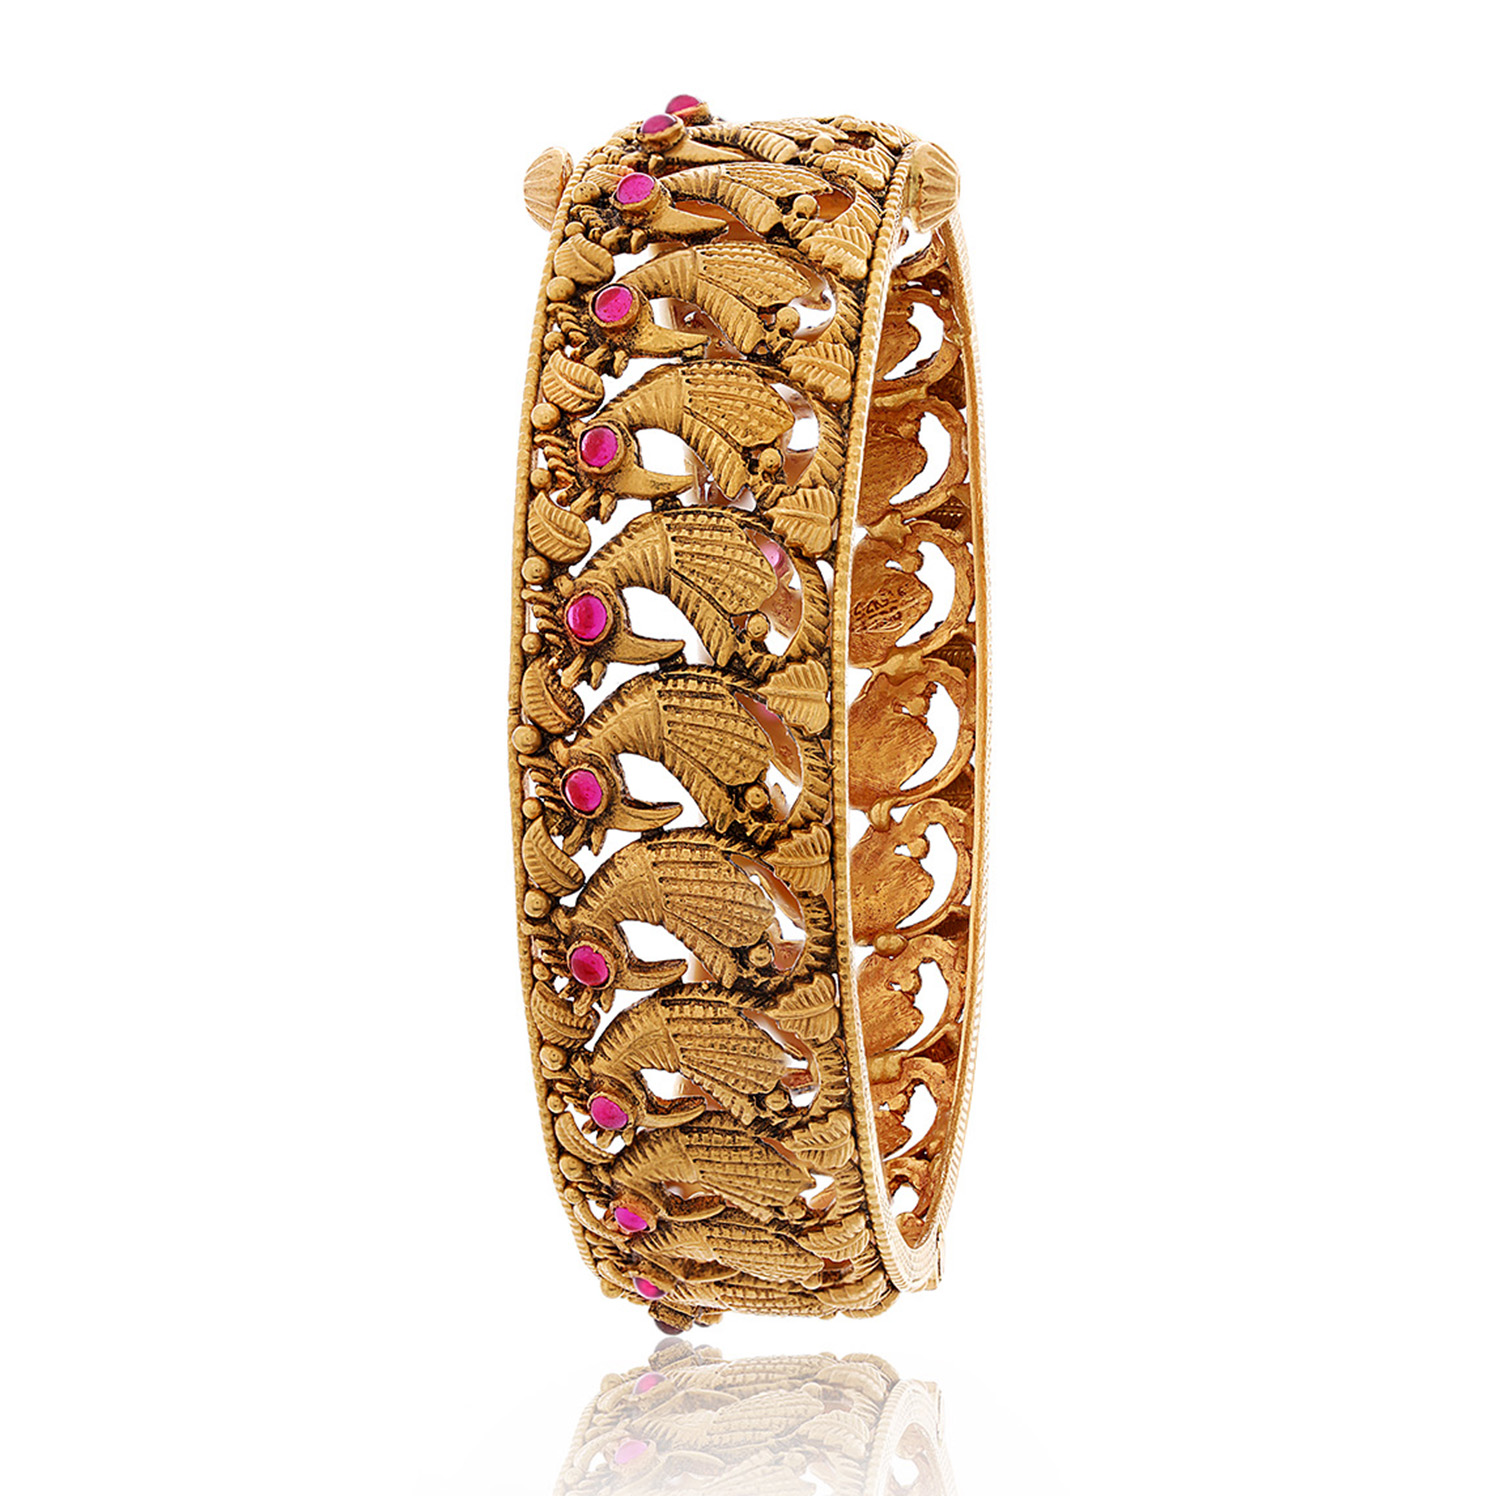 Bn3 22ct Gold Bombay Bangles,, 52% OFF | www.ens.laatech.com